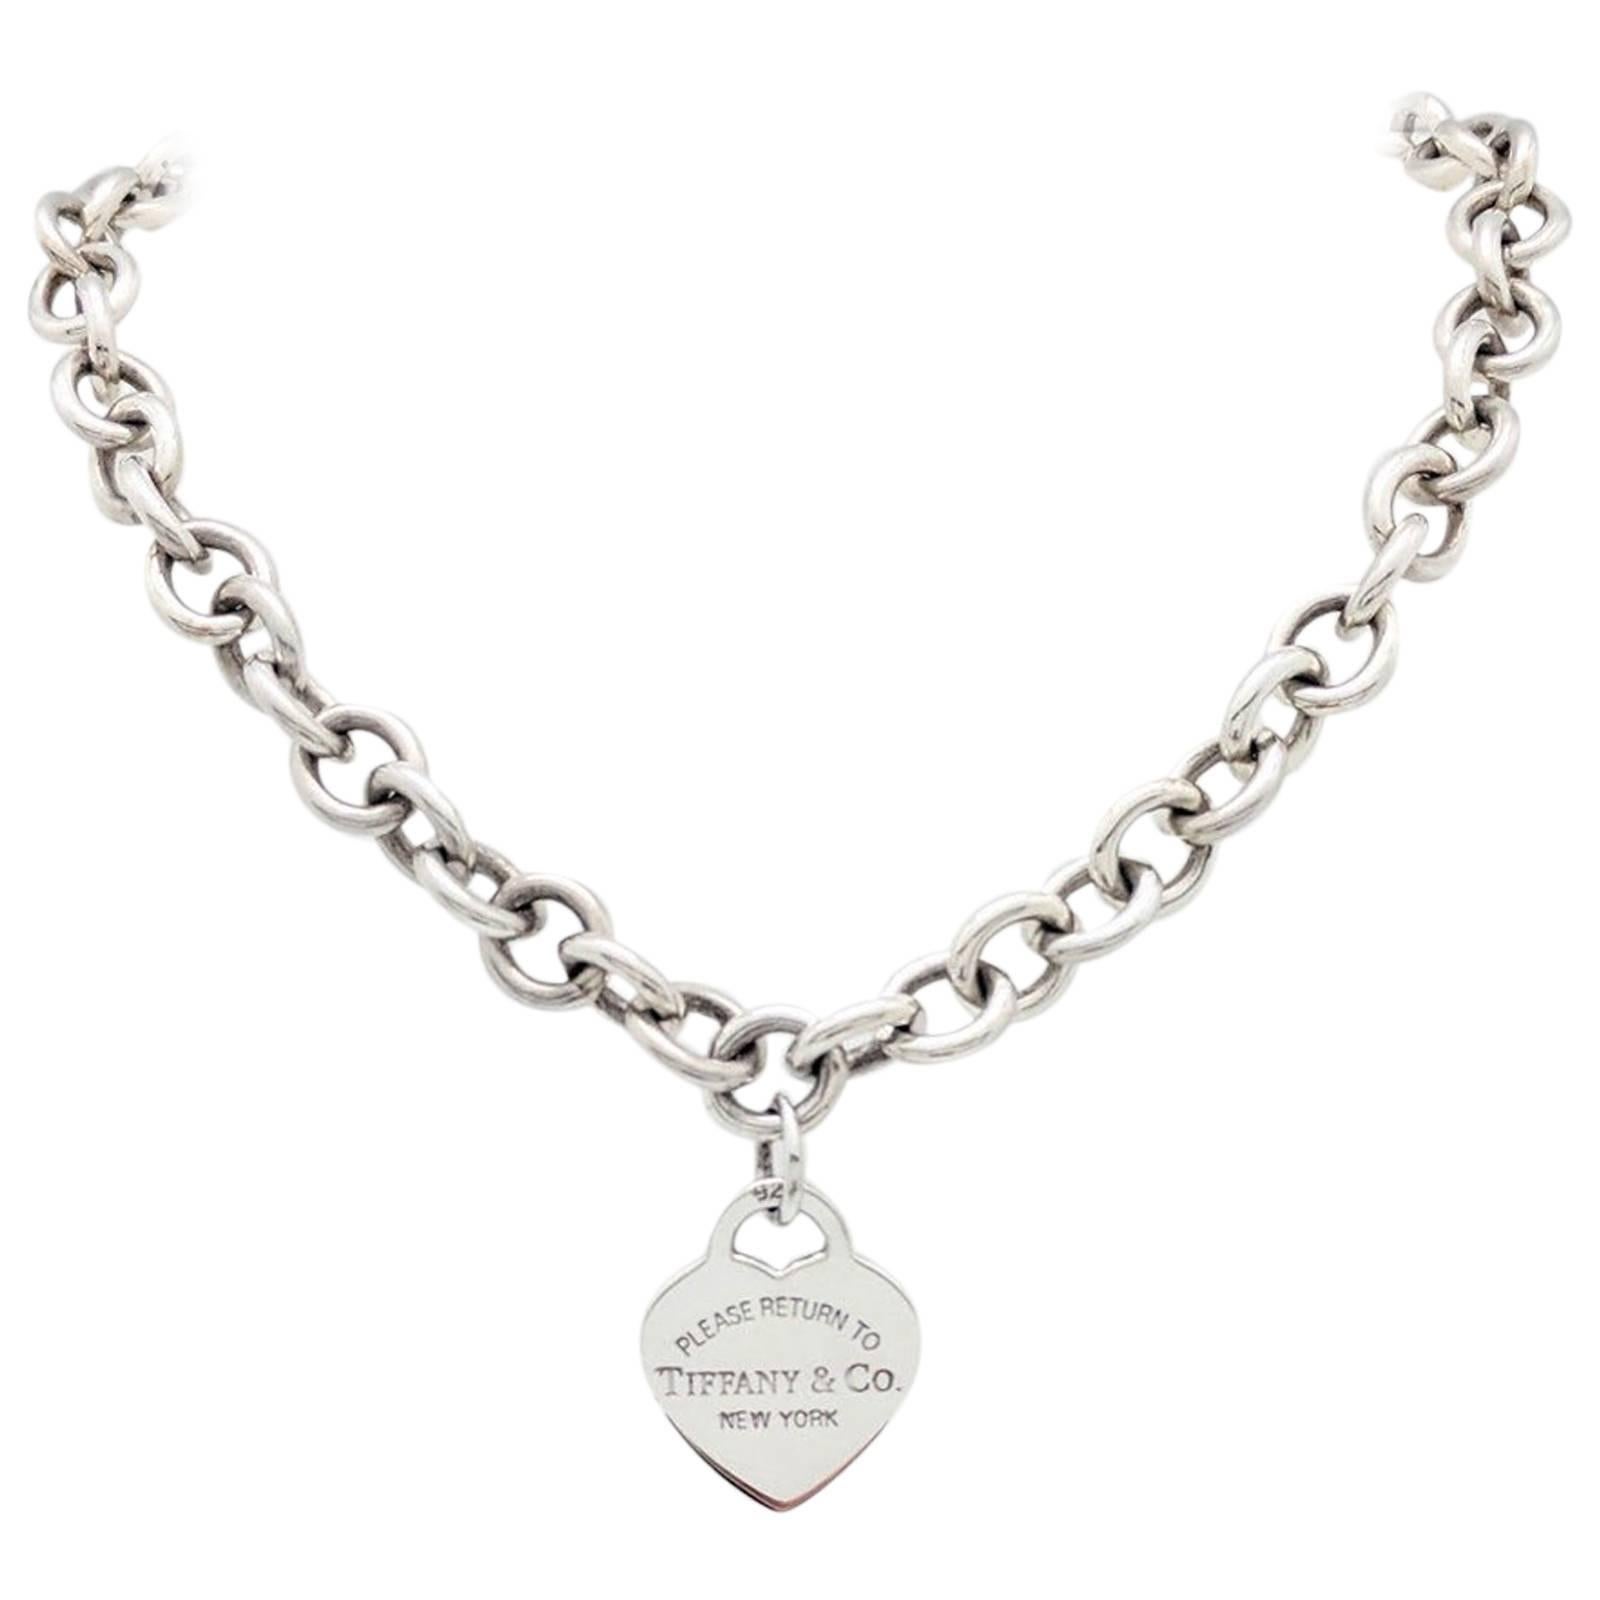 Tiffany & Co. Sterling Silver Please Return to Heart Necklace